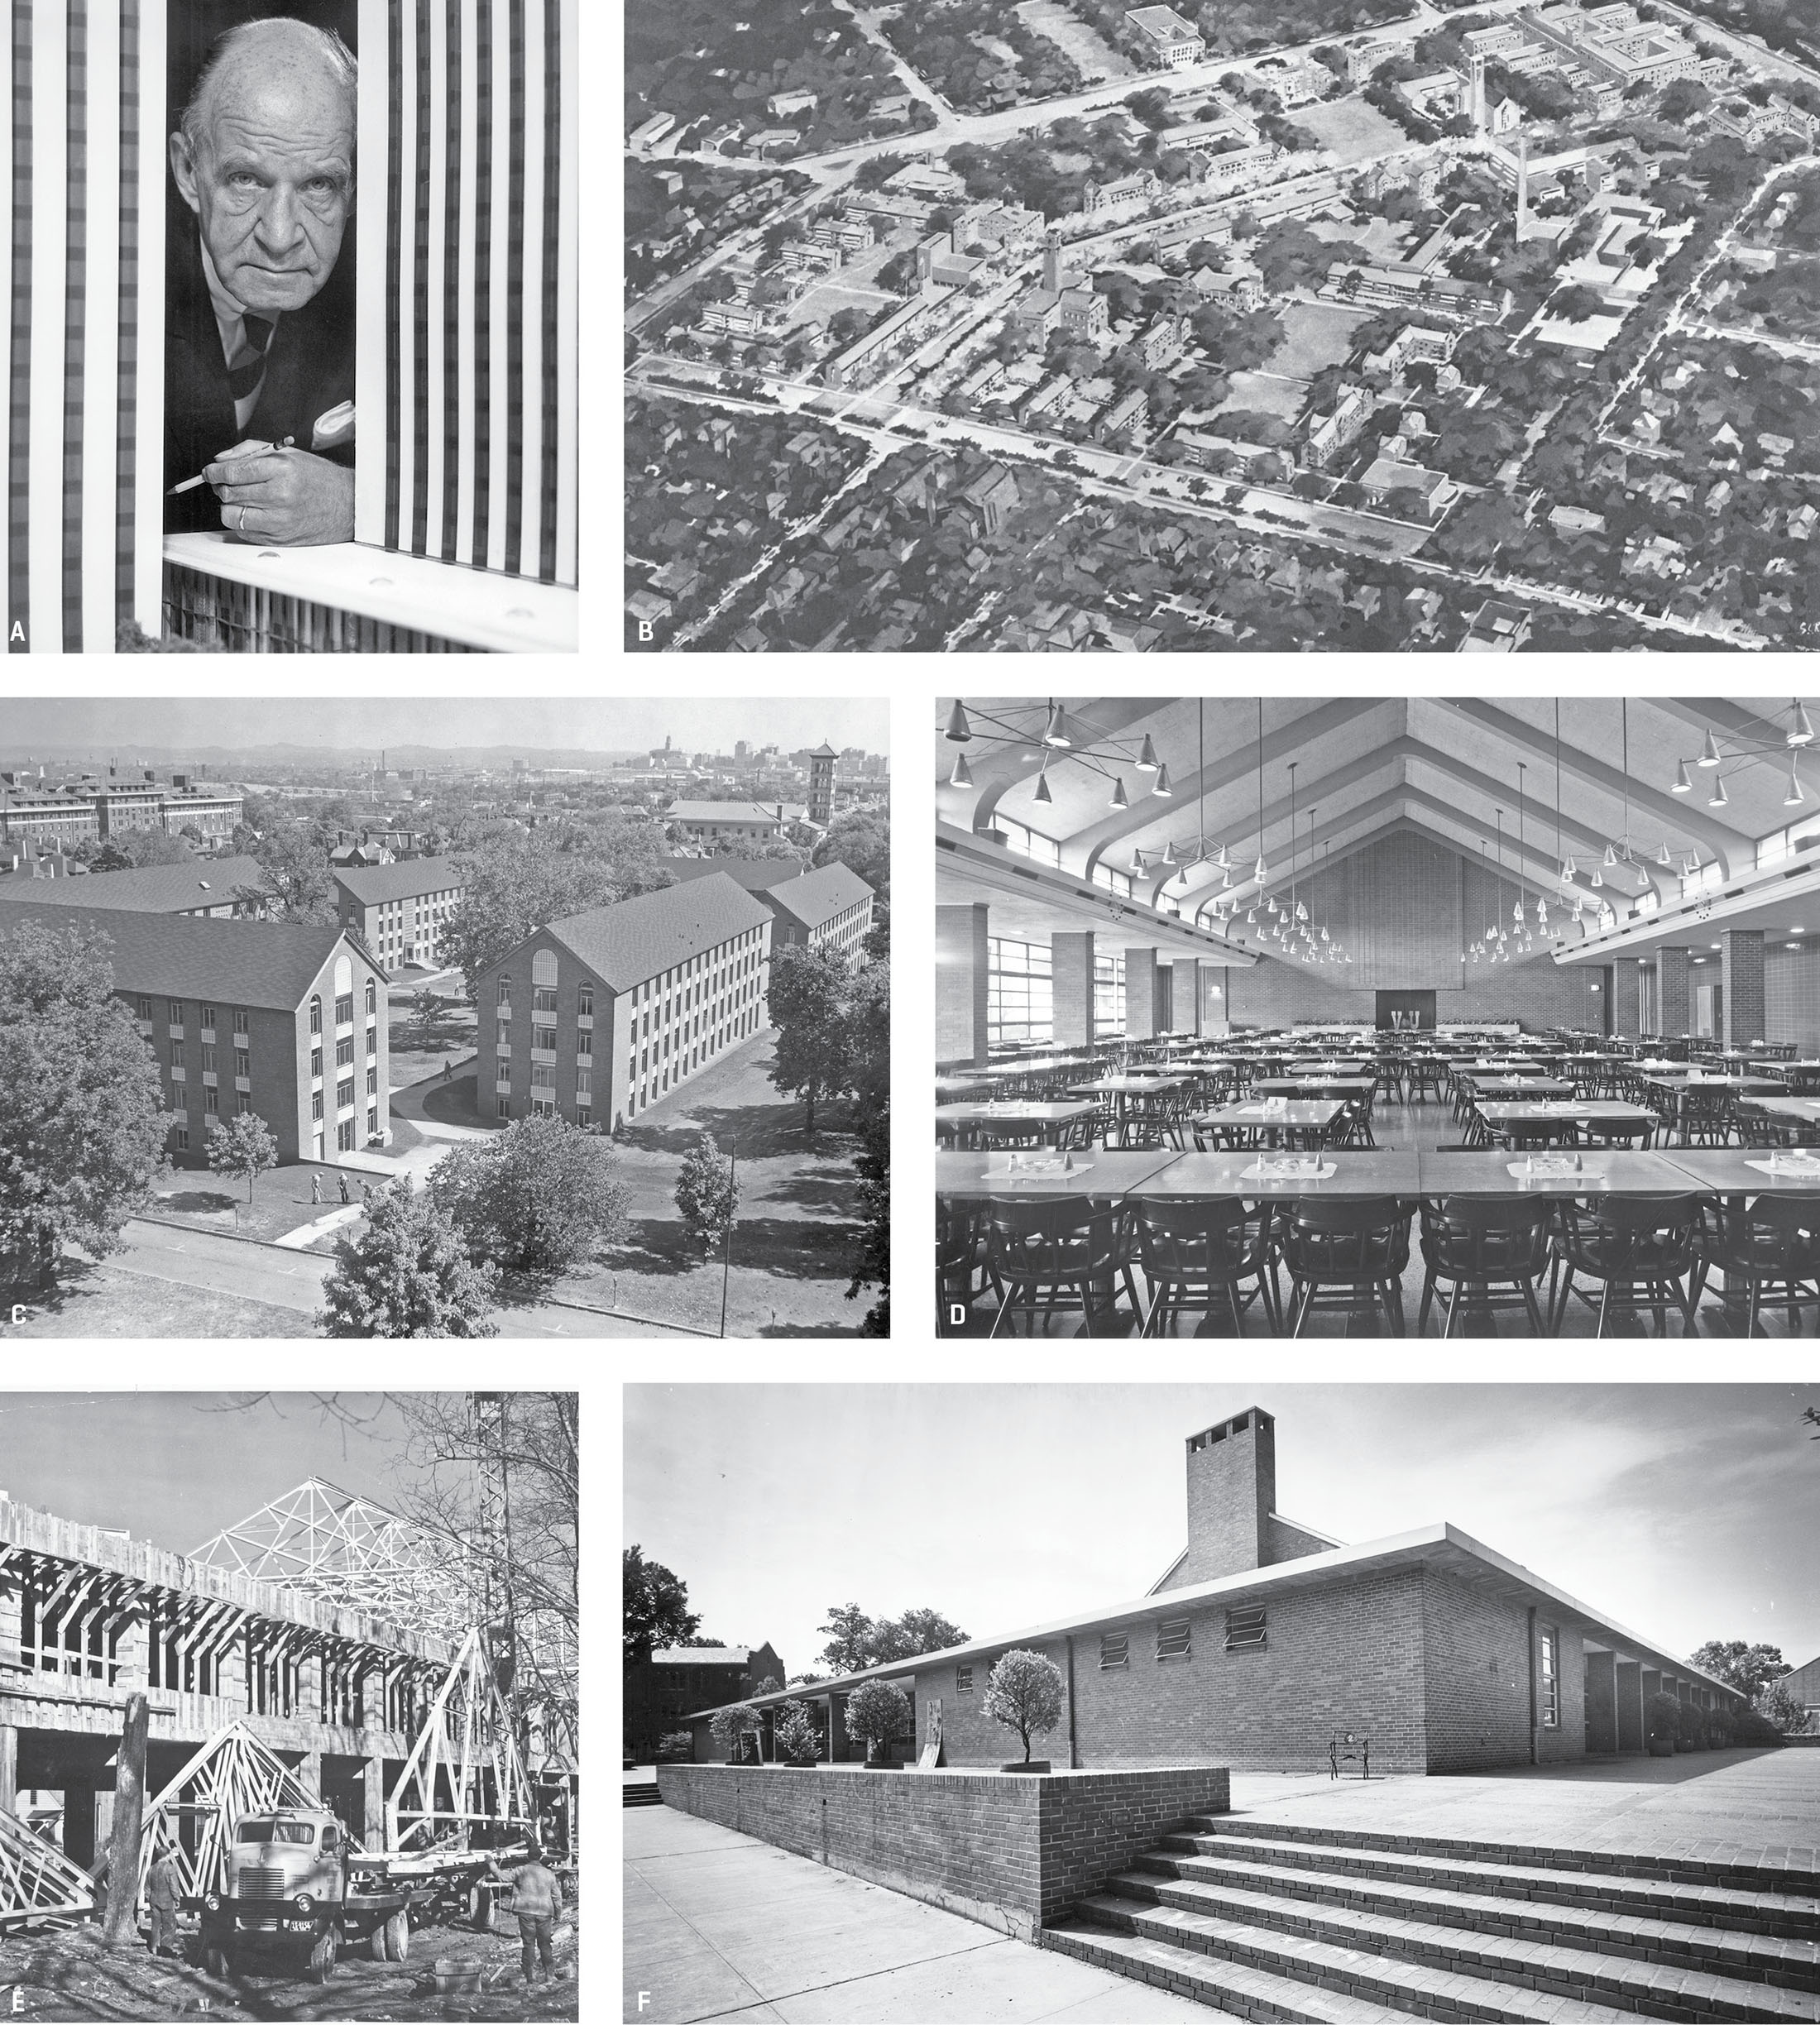 Photos of Edward Durell Stone and his buildings around campus